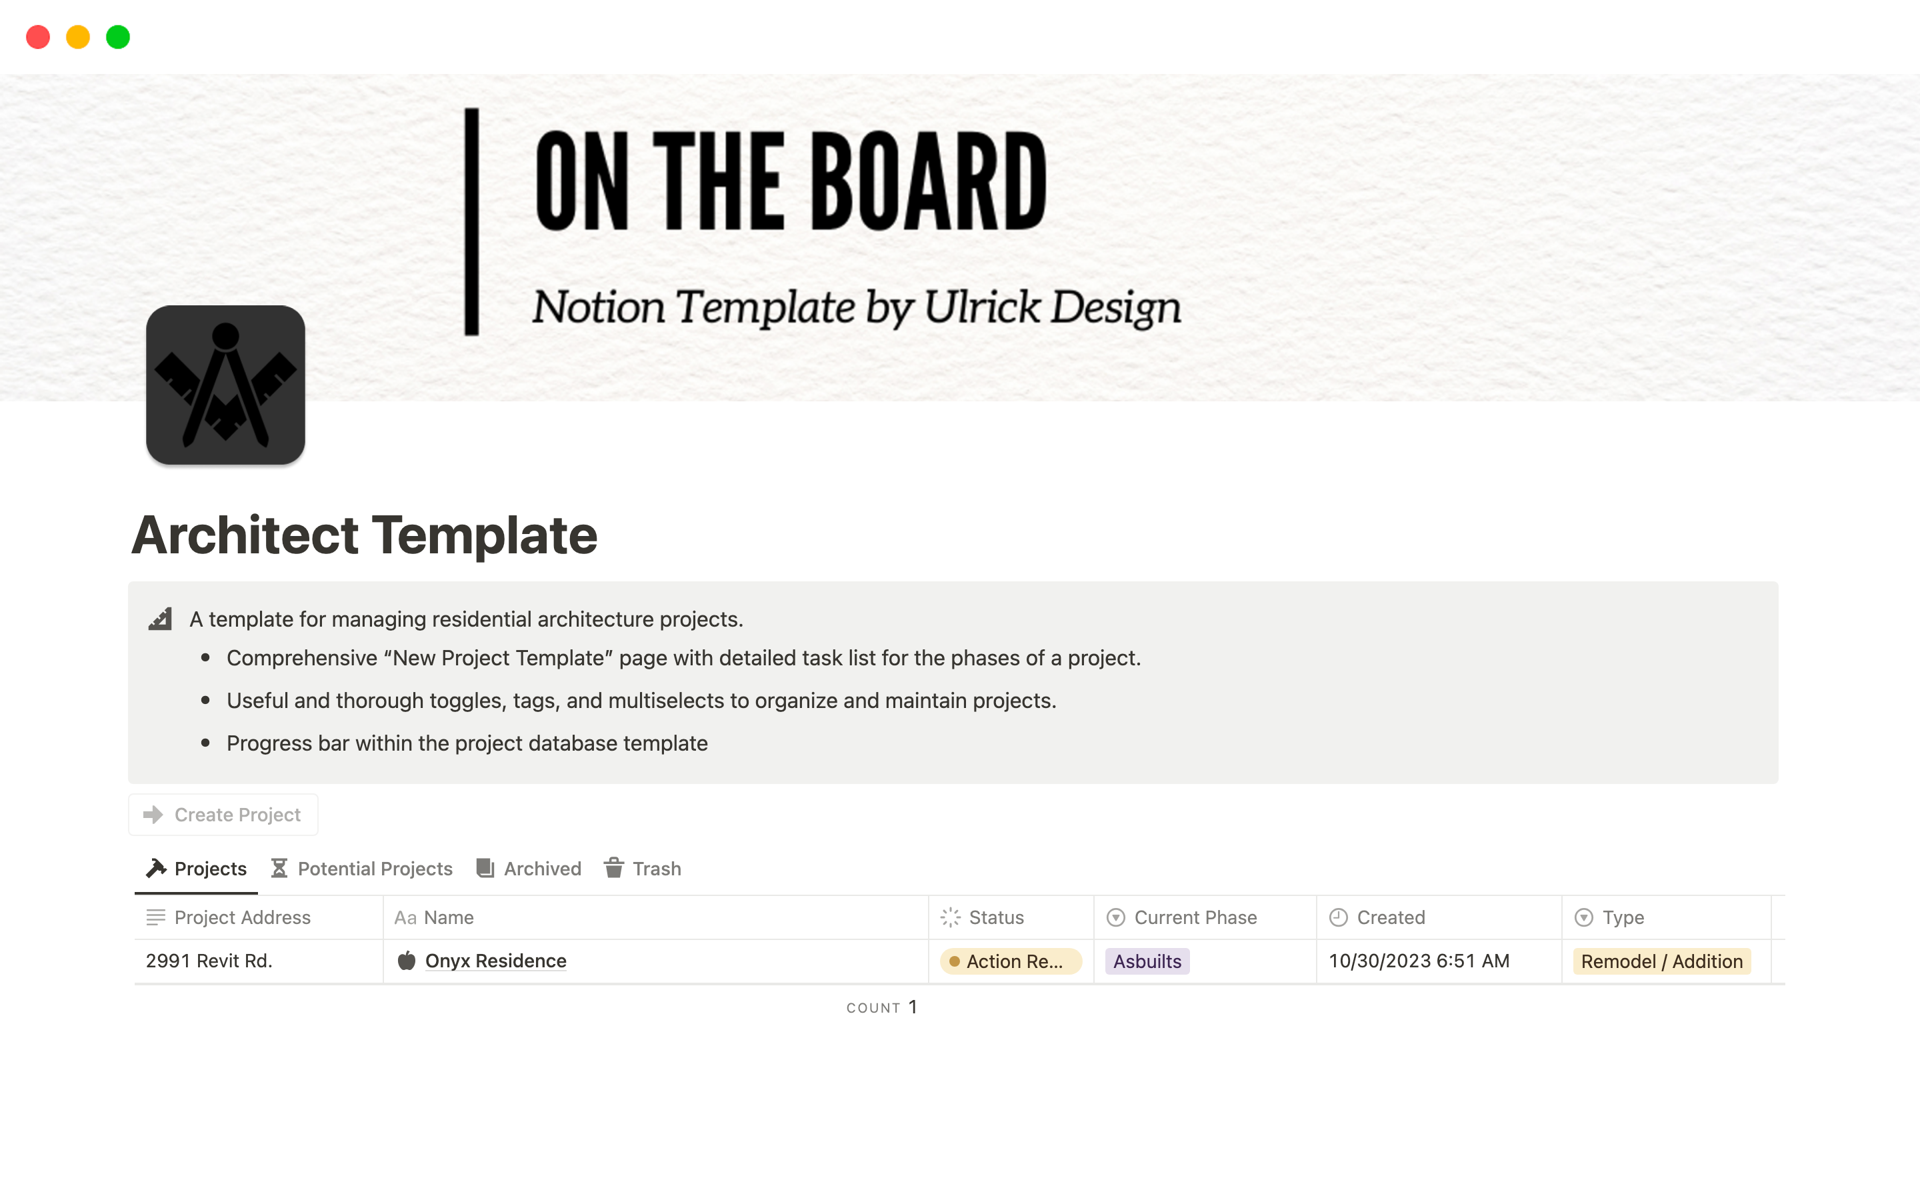 A super robust project management tool for architects.